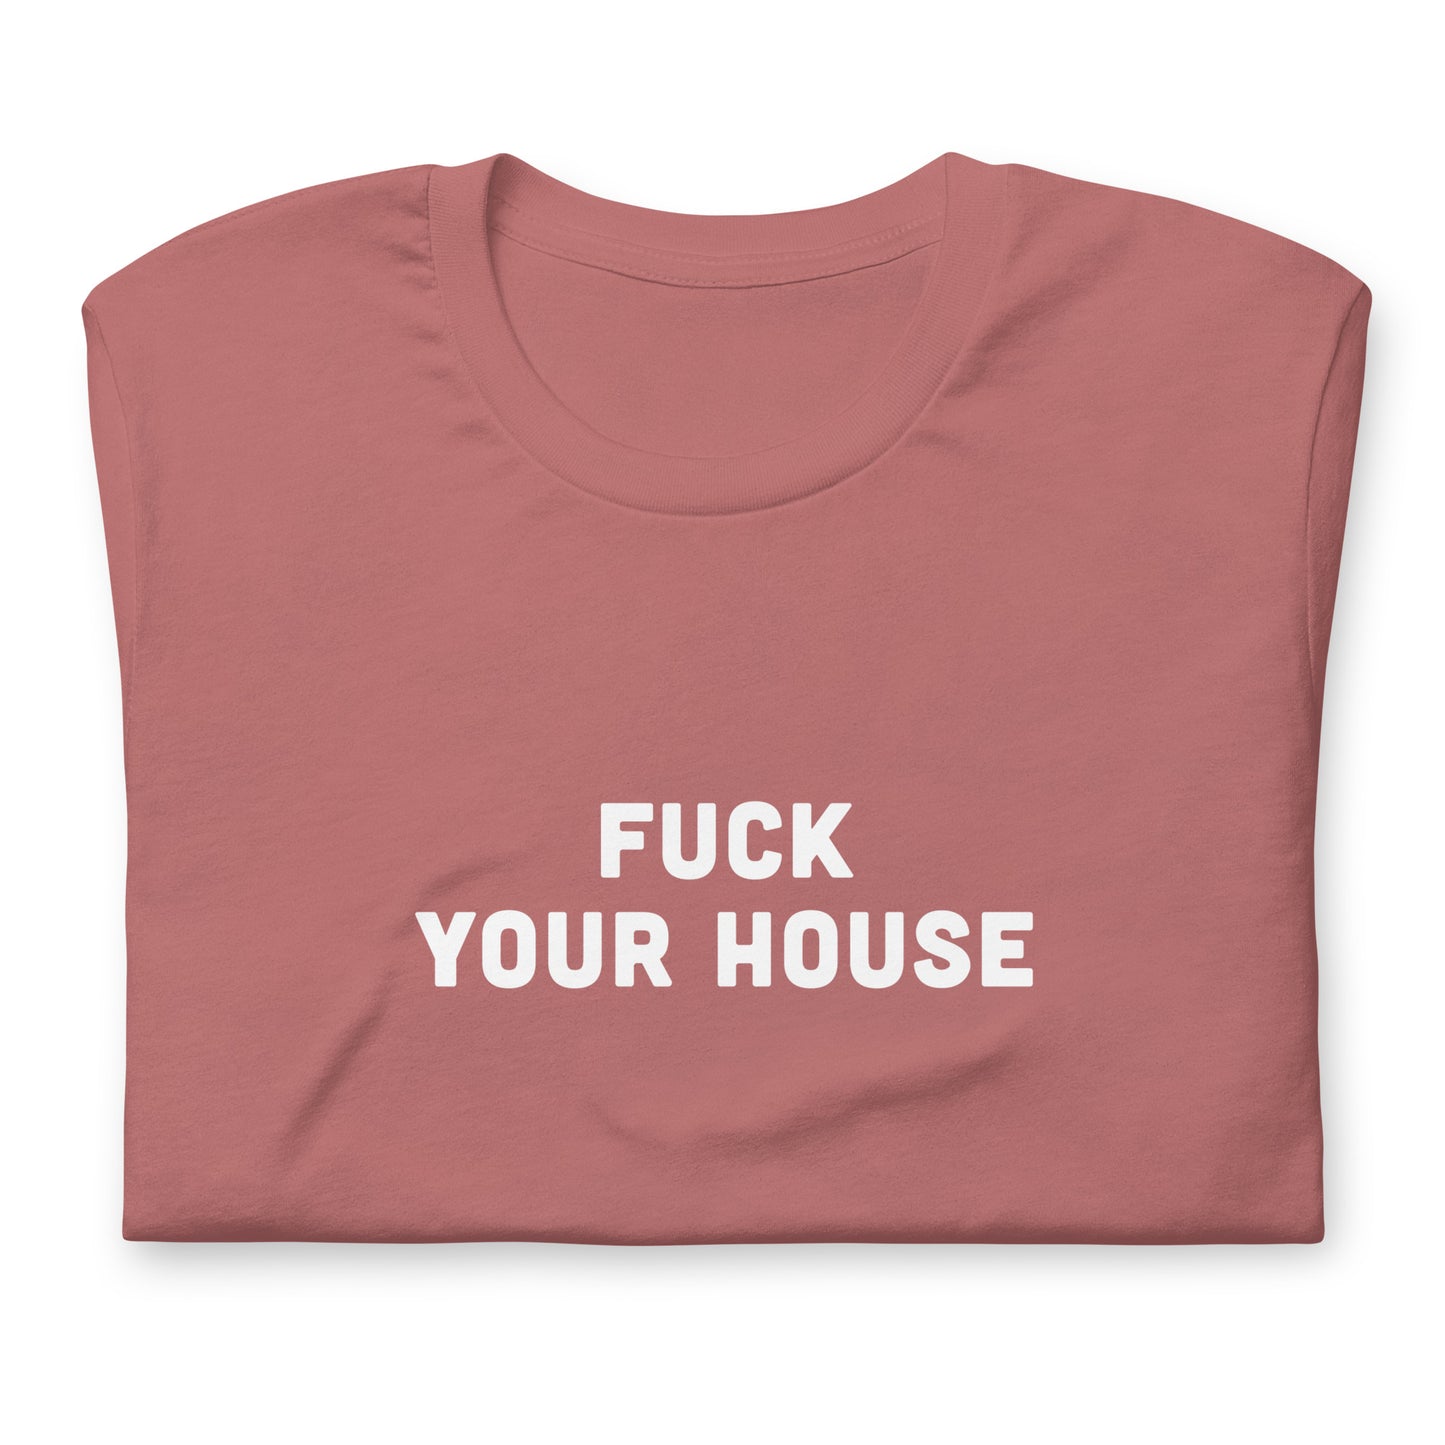 Fuck Your House T-Shirt Size 2XL Color Navy